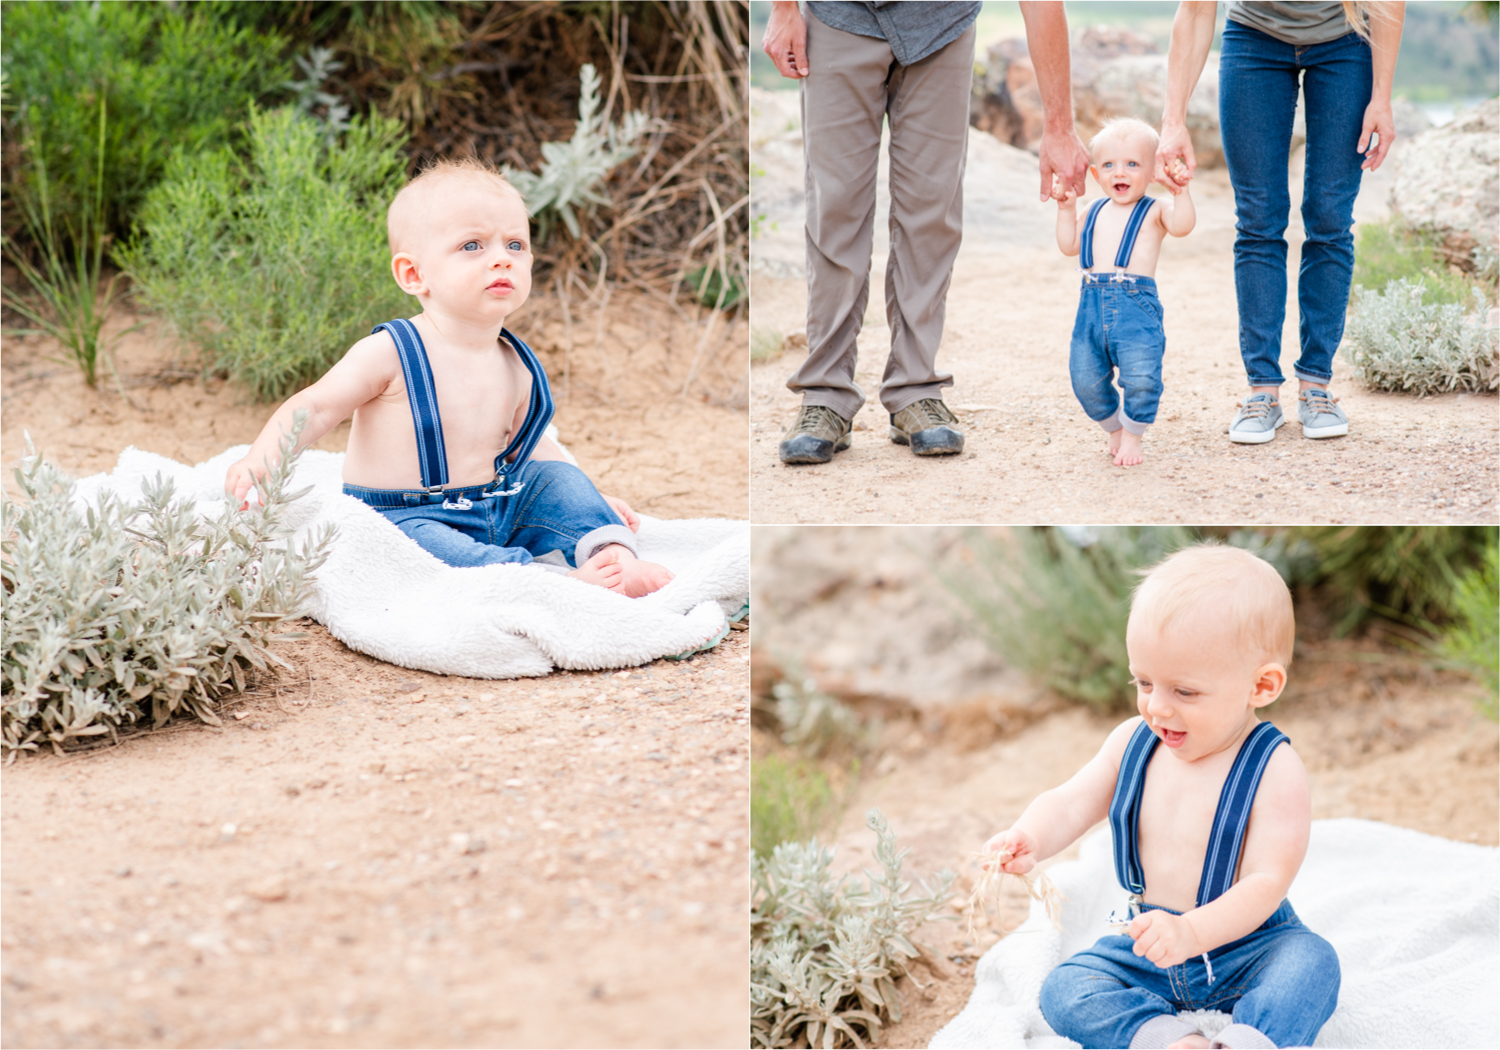 Colorado Mountain Engagement at Horsetooth Reservoir for Wanderlust Couple and their son | Britni Girard Photography